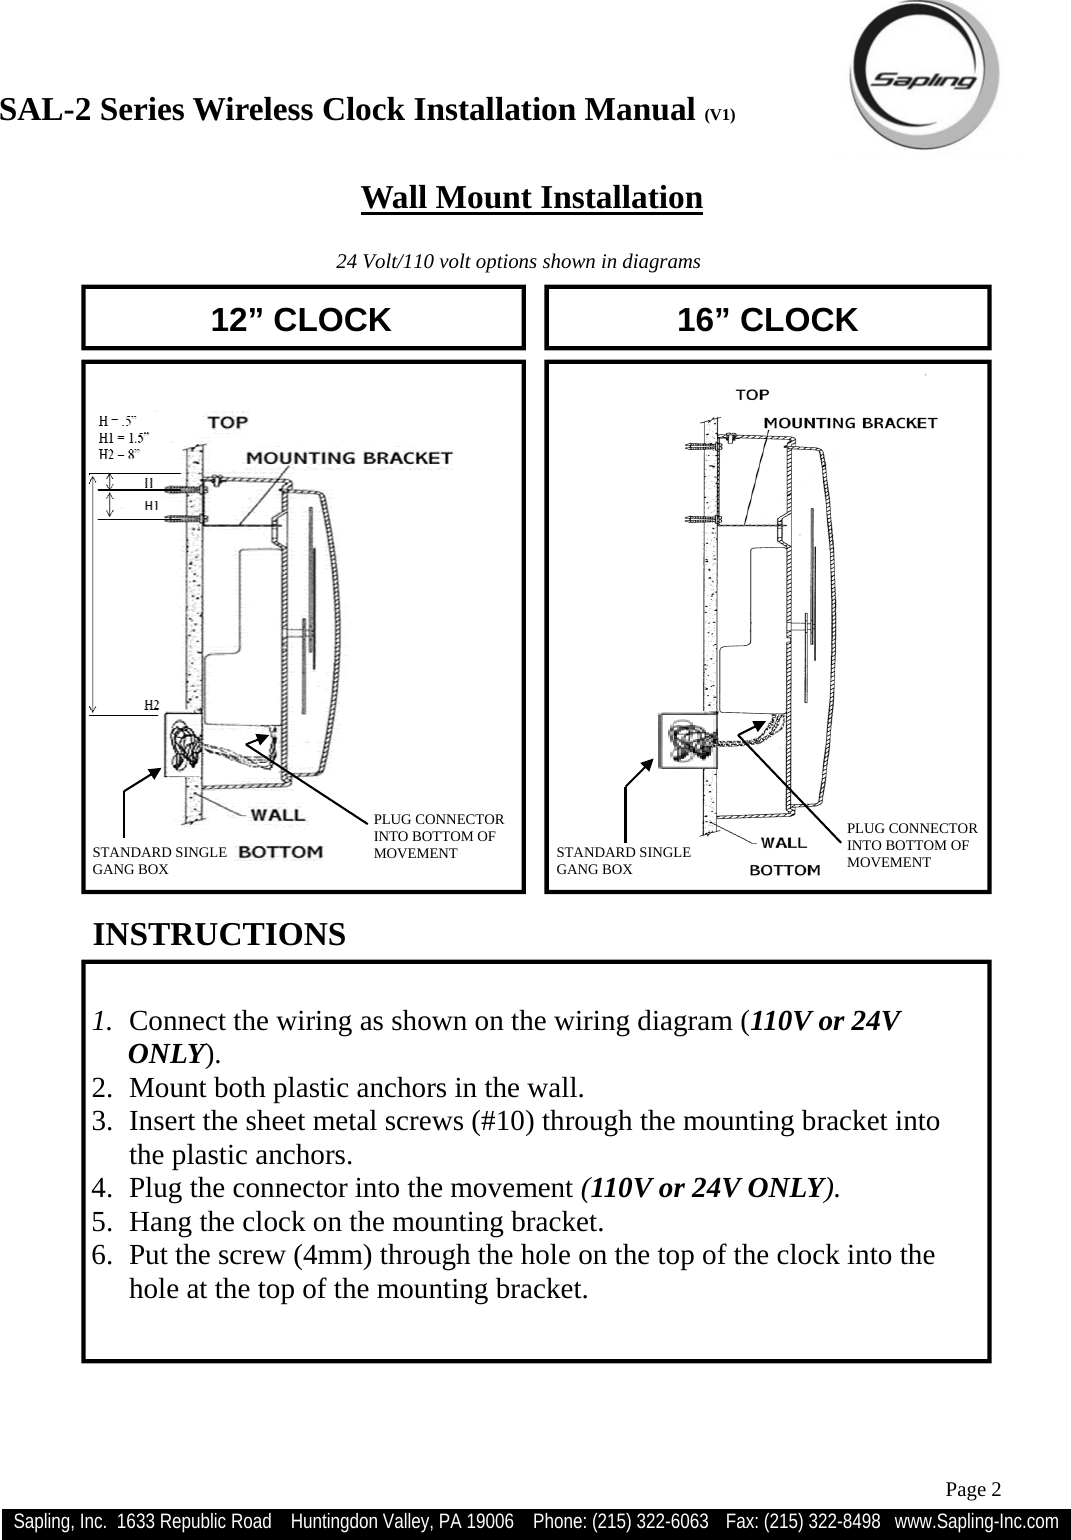 SAL-2 Series Wireless Clock Installation Manual (V1) Sapling, Inc.  1633 Republic Road    Huntingdon Valley, PA 19006    Phone: (215) 322-6063   Fax: (215) 322-8498   www.Sapling-Inc.com Page 2   1.  Connect the wiring as shown on the wiring diagram (110V or 24V                                           ONLY). 2.  Mount both plastic anchors in the wall. 3.  Insert the sheet metal screws (#10) through the mounting bracket into the plastic anchors. 4.  Plug the connector into the movement (110V or 24V ONLY). 5.  Hang the clock on the mounting bracket. 6.  Put the screw (4mm) through the hole on the top of the clock into the hole at the top of the mounting bracket. INSTRUCTIONS  12” CLOCK  16” CLOCK    Wall Mount Installation 24 Volt/110 volt options shown in diagrams STANDARD SINGLE  GANG BOX PLUG CONNECTOR INTO BOTTOM OF  MOVEMENT  STANDARD SINGLE  GANG BOX PLUG CONNECTOR INTO BOTTOM OF  MOVEMENT 